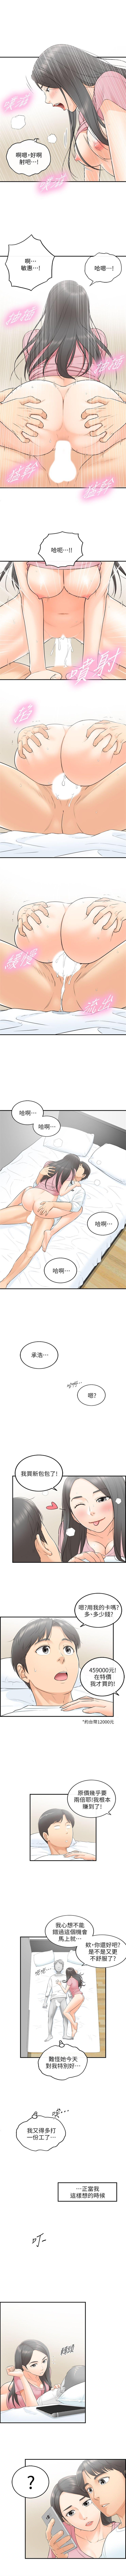 Shorts 正妹小主管 1-51 官方中文（連載中） Dykes - Page 7